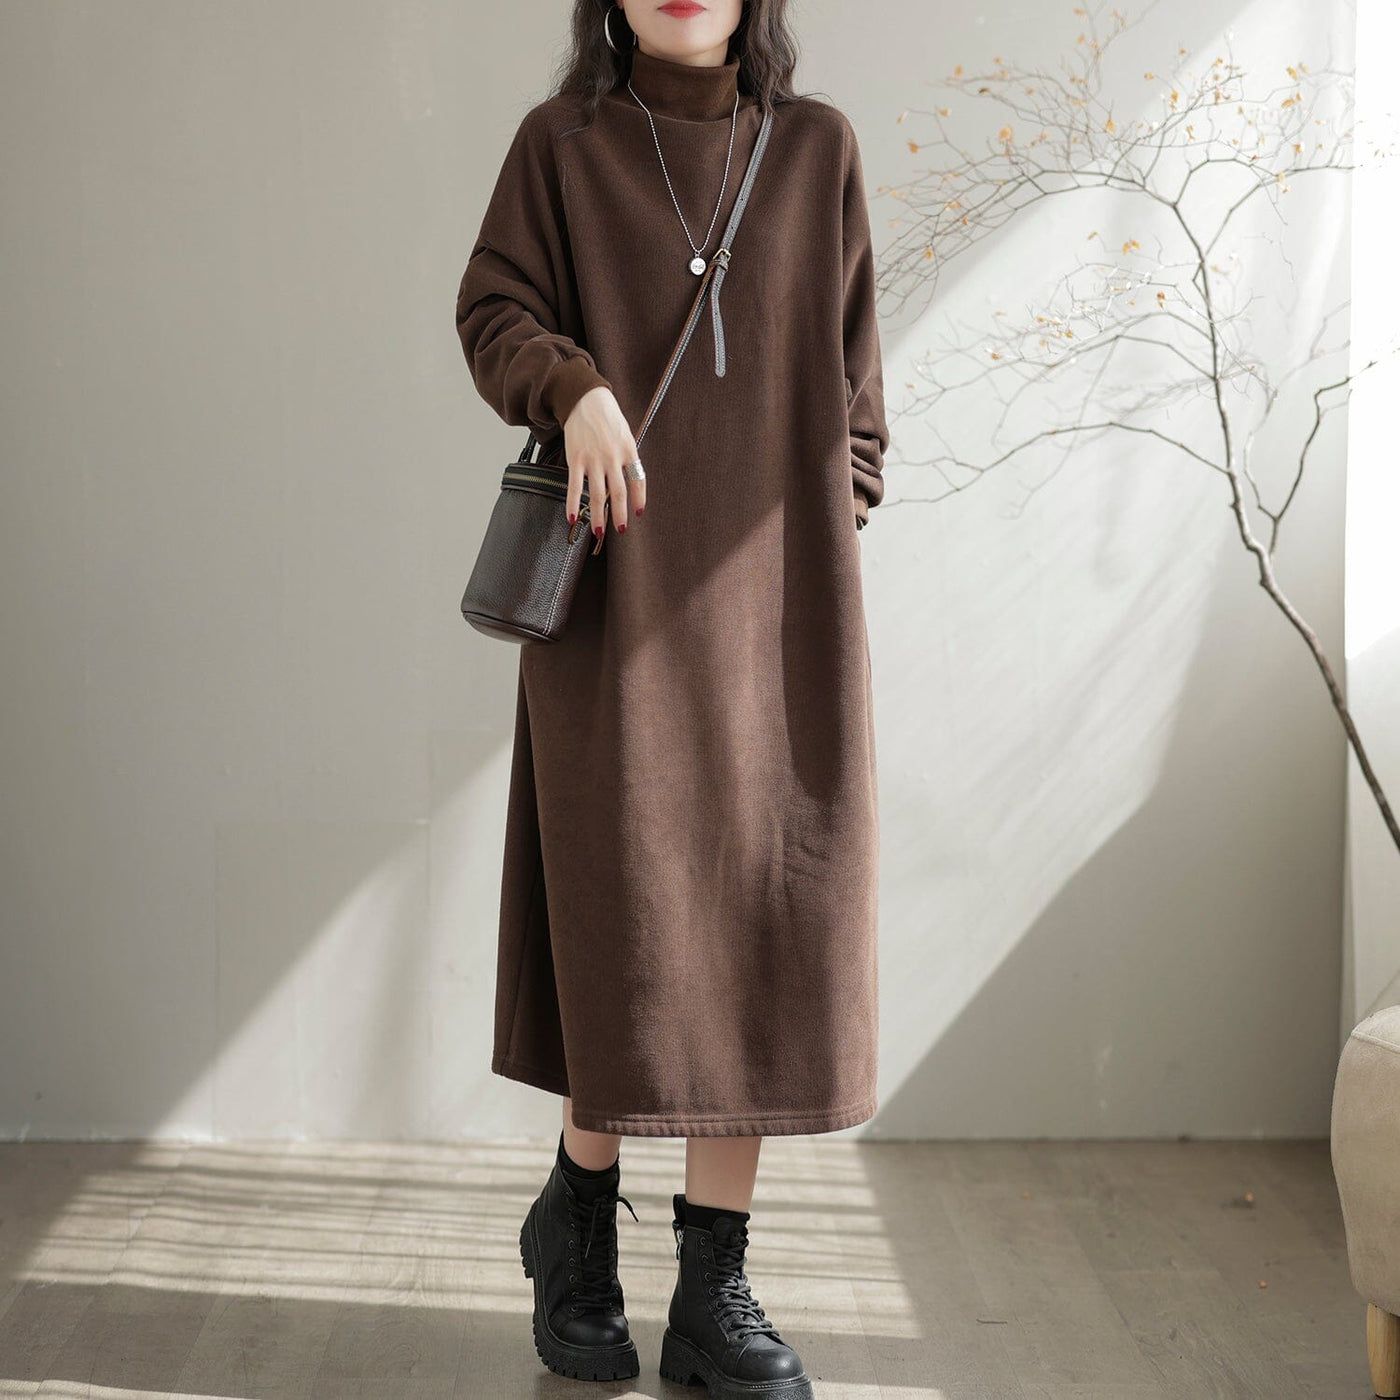 Autumn Winter Furred Turtleneck Casual Dress Nov 2022 New Arrival One Size Coffee 